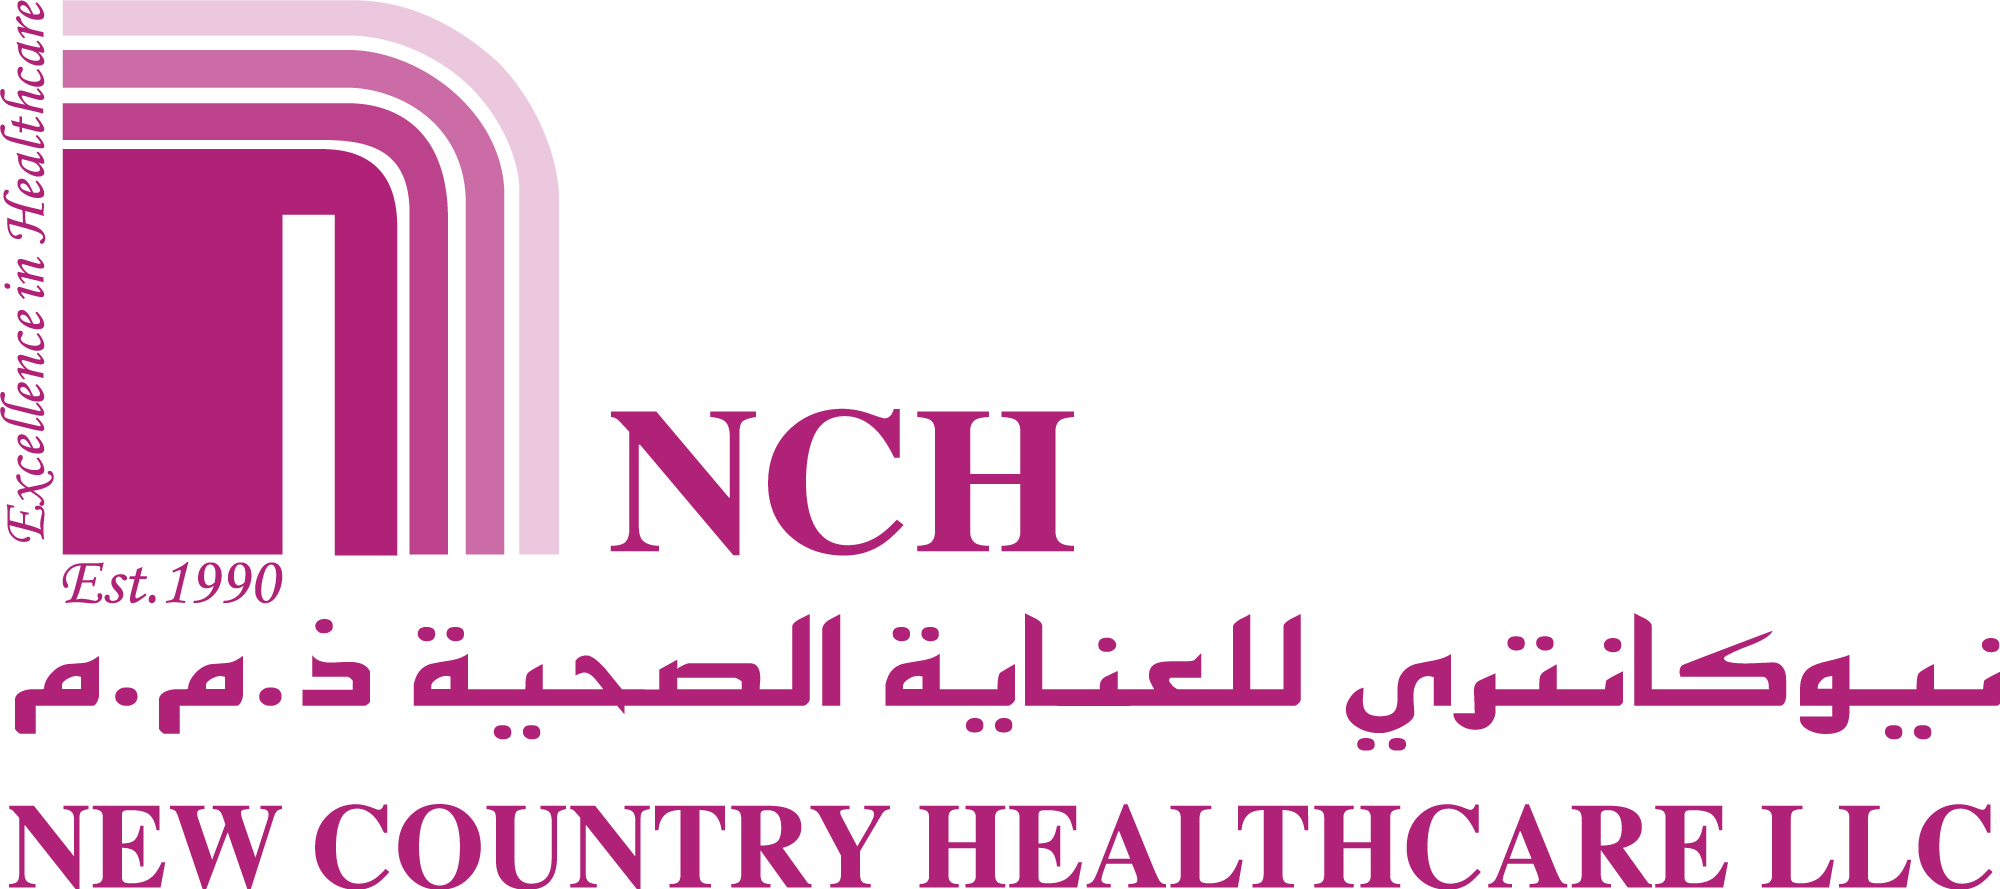 New Country Healthcare LLC